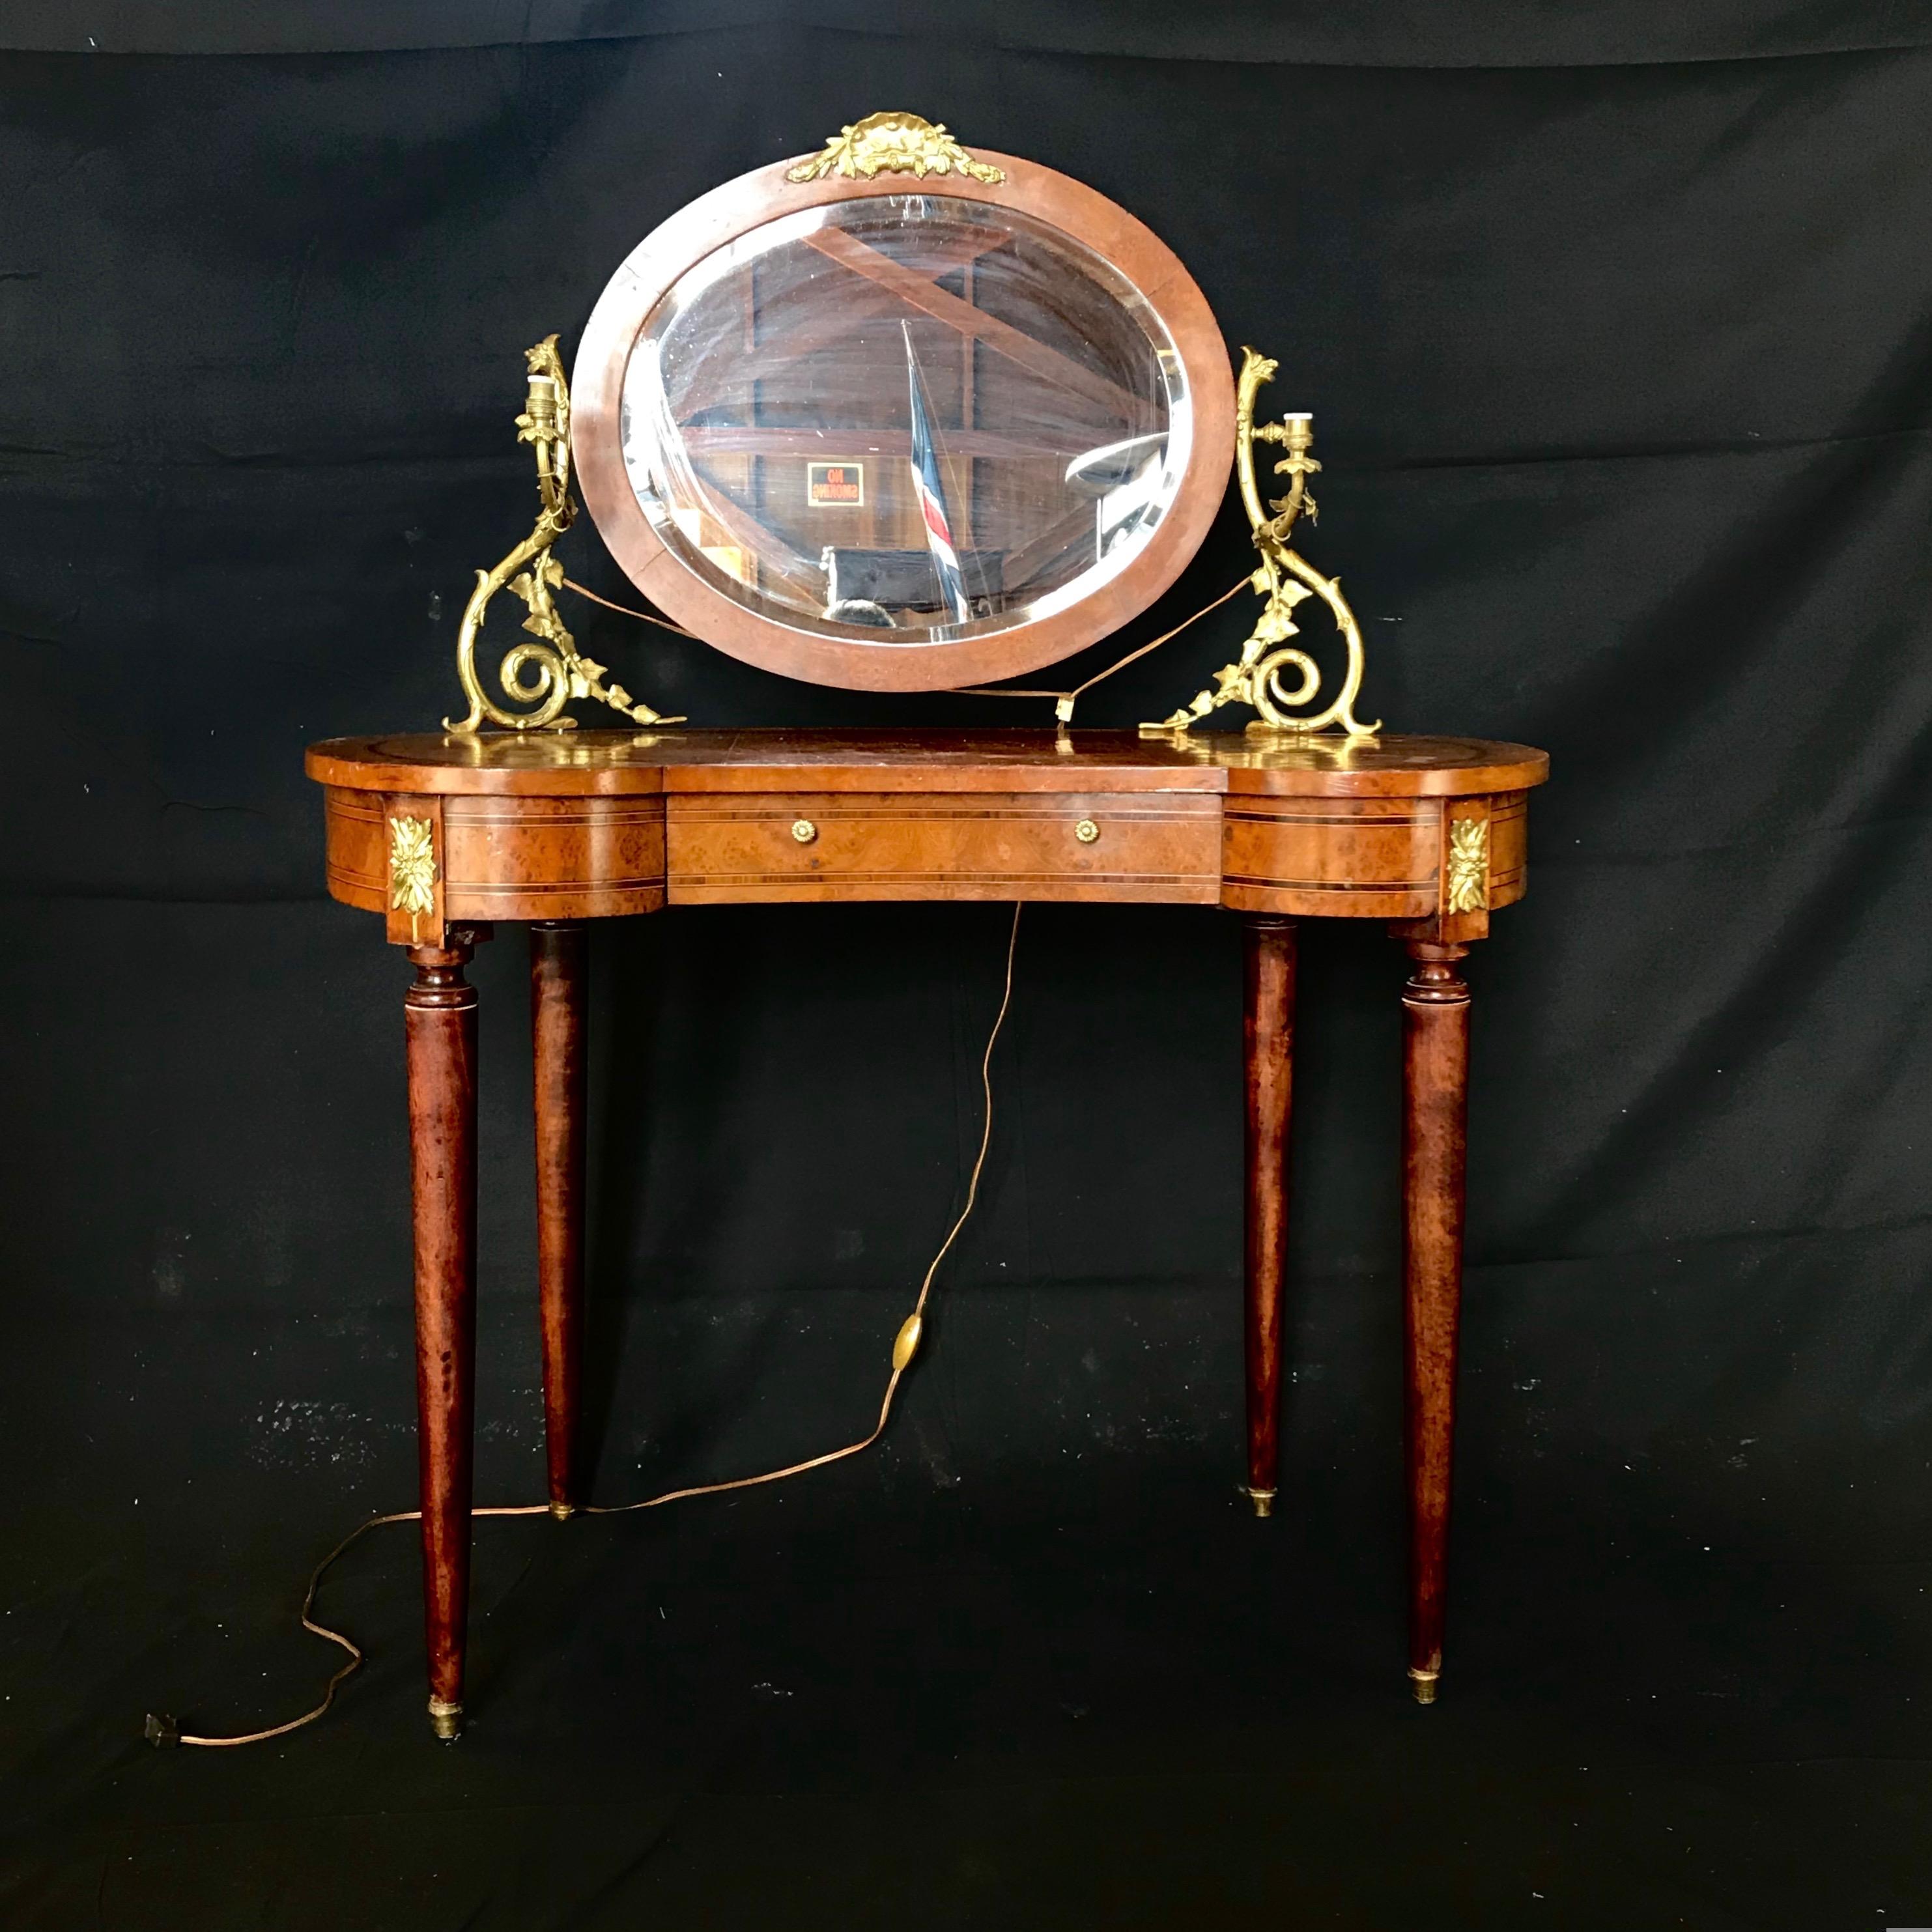 A fine French Louis XVI inlaid burled walnut gilt bronze mounted dressing table, having kidney shaped top with gilt bronze encadrement and a superstructure supporting a beveled oval mirror flanked by gilt bronze scrolling candle arms -wired to